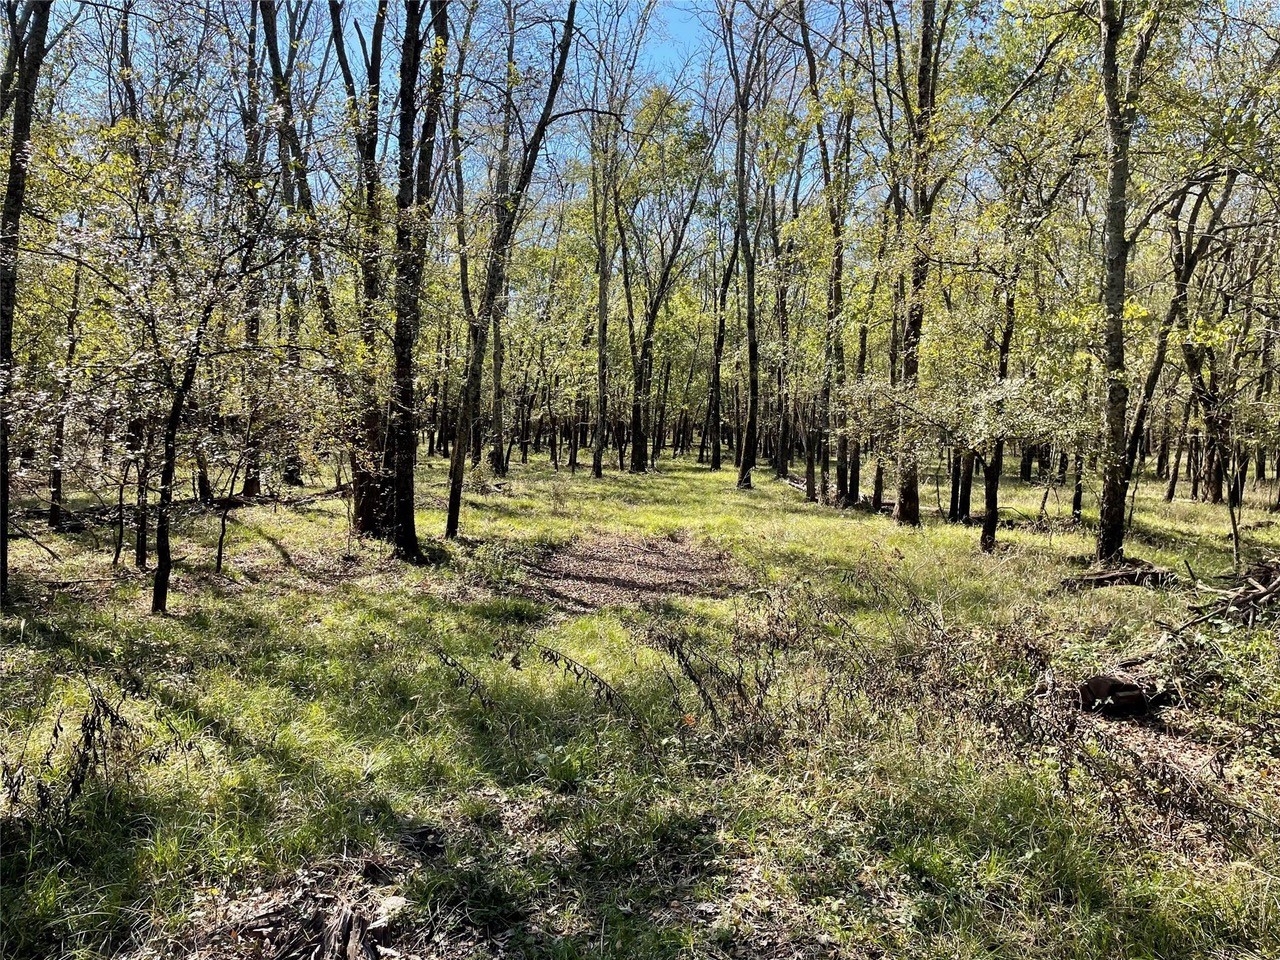 Hunting Enthusiasts Will Appreciate this 100 Acre Wooded Tract that Just Hit the Market